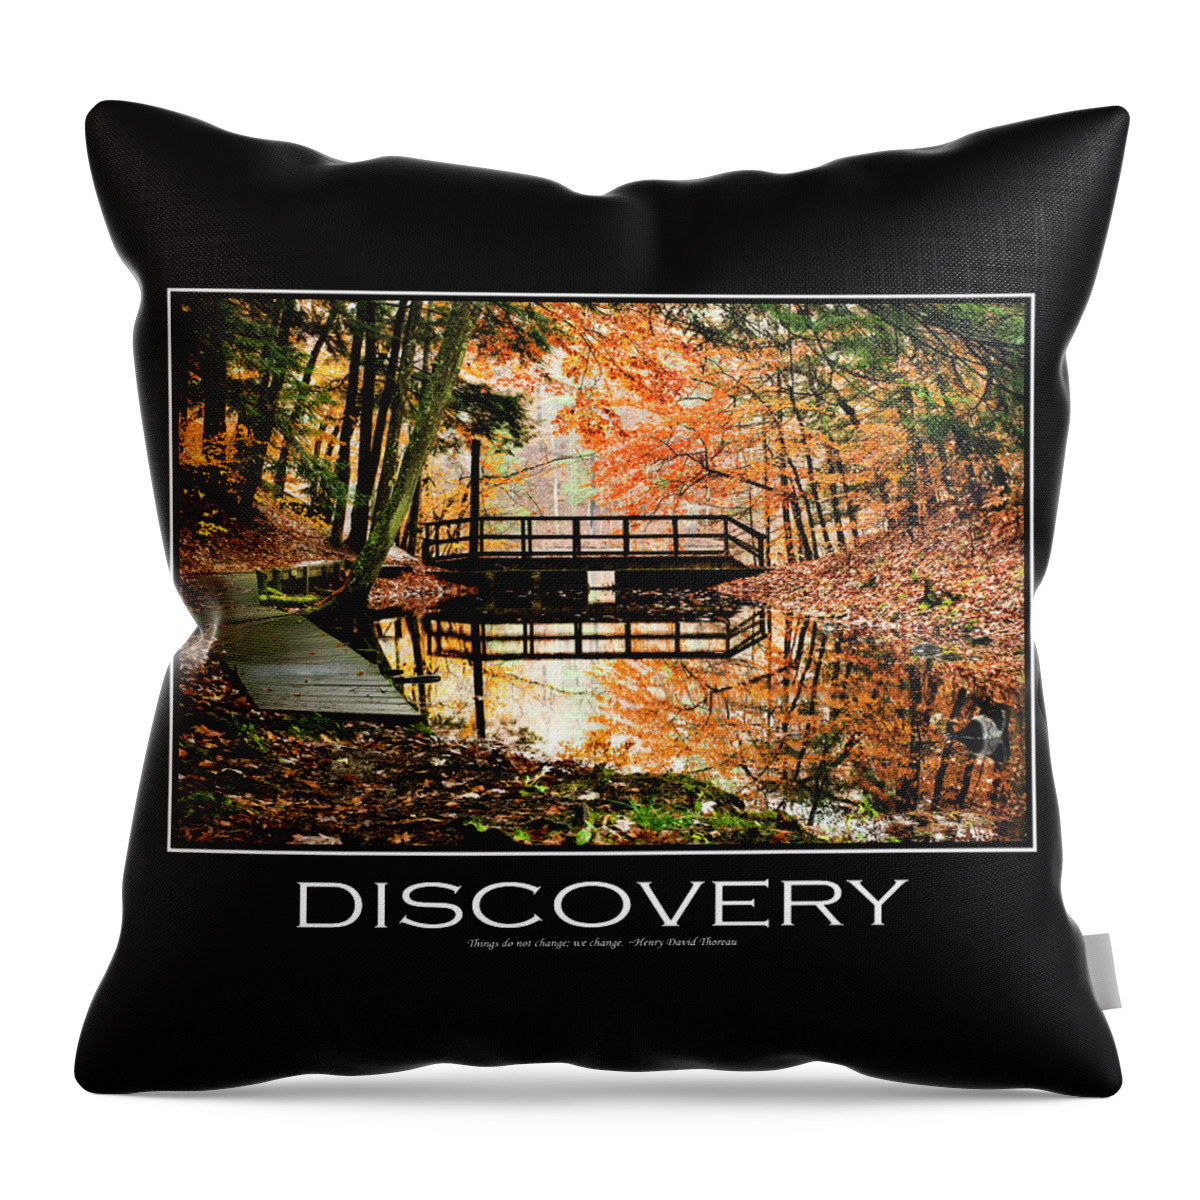 Inspirational Throw Pillow featuring the mixed media Discovery Inspirational Motivational Poster Art by Christina Rollo